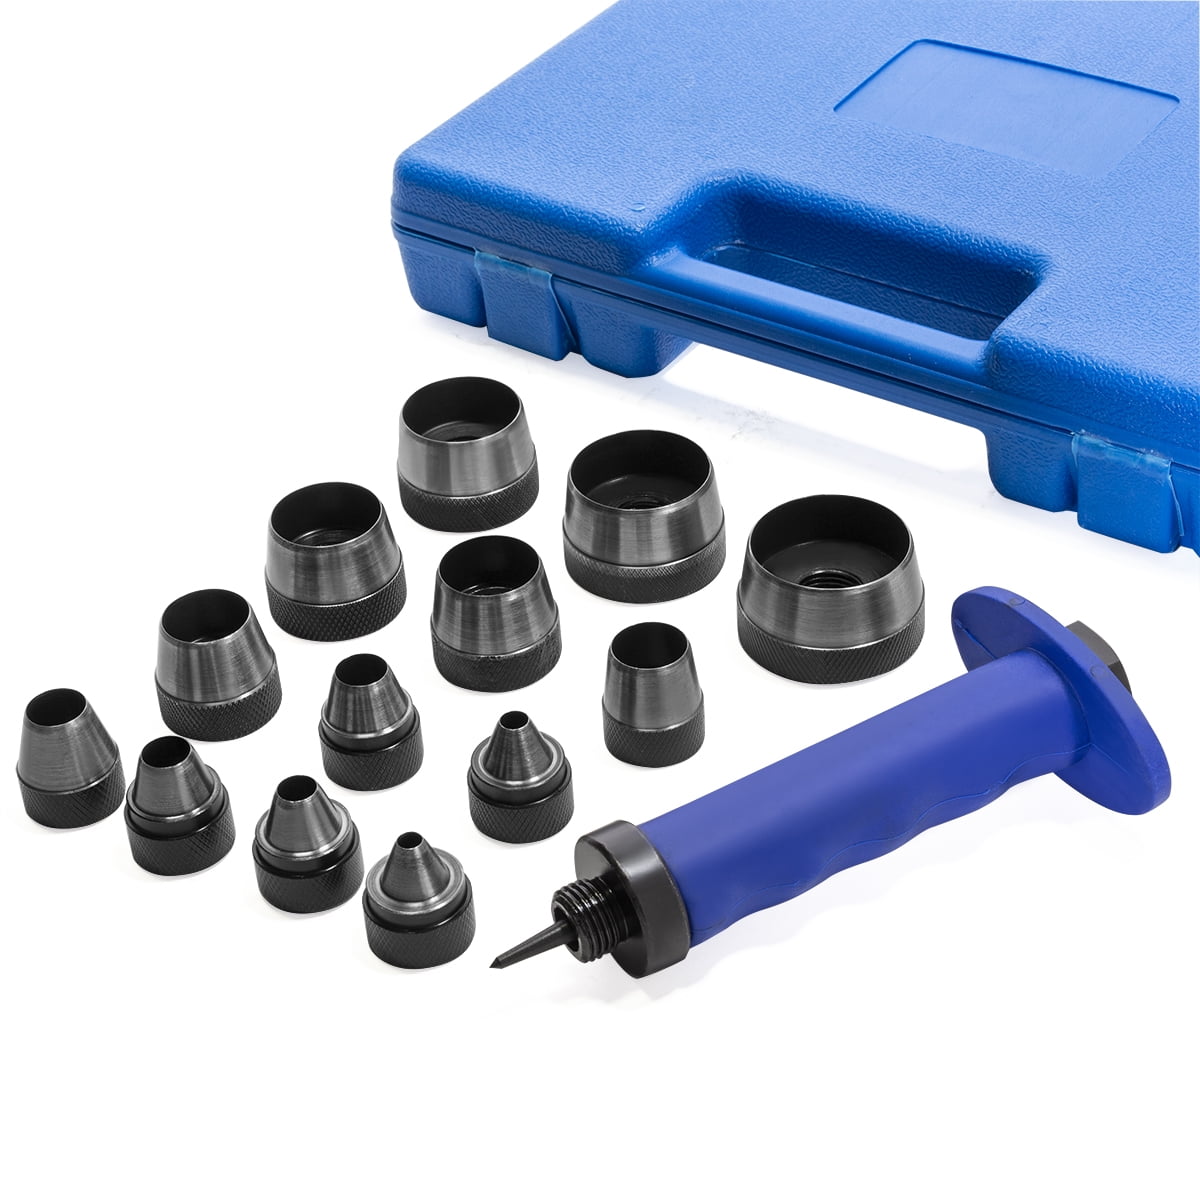 Replacement Punch Heads for Xtreme Duty Hole Punch